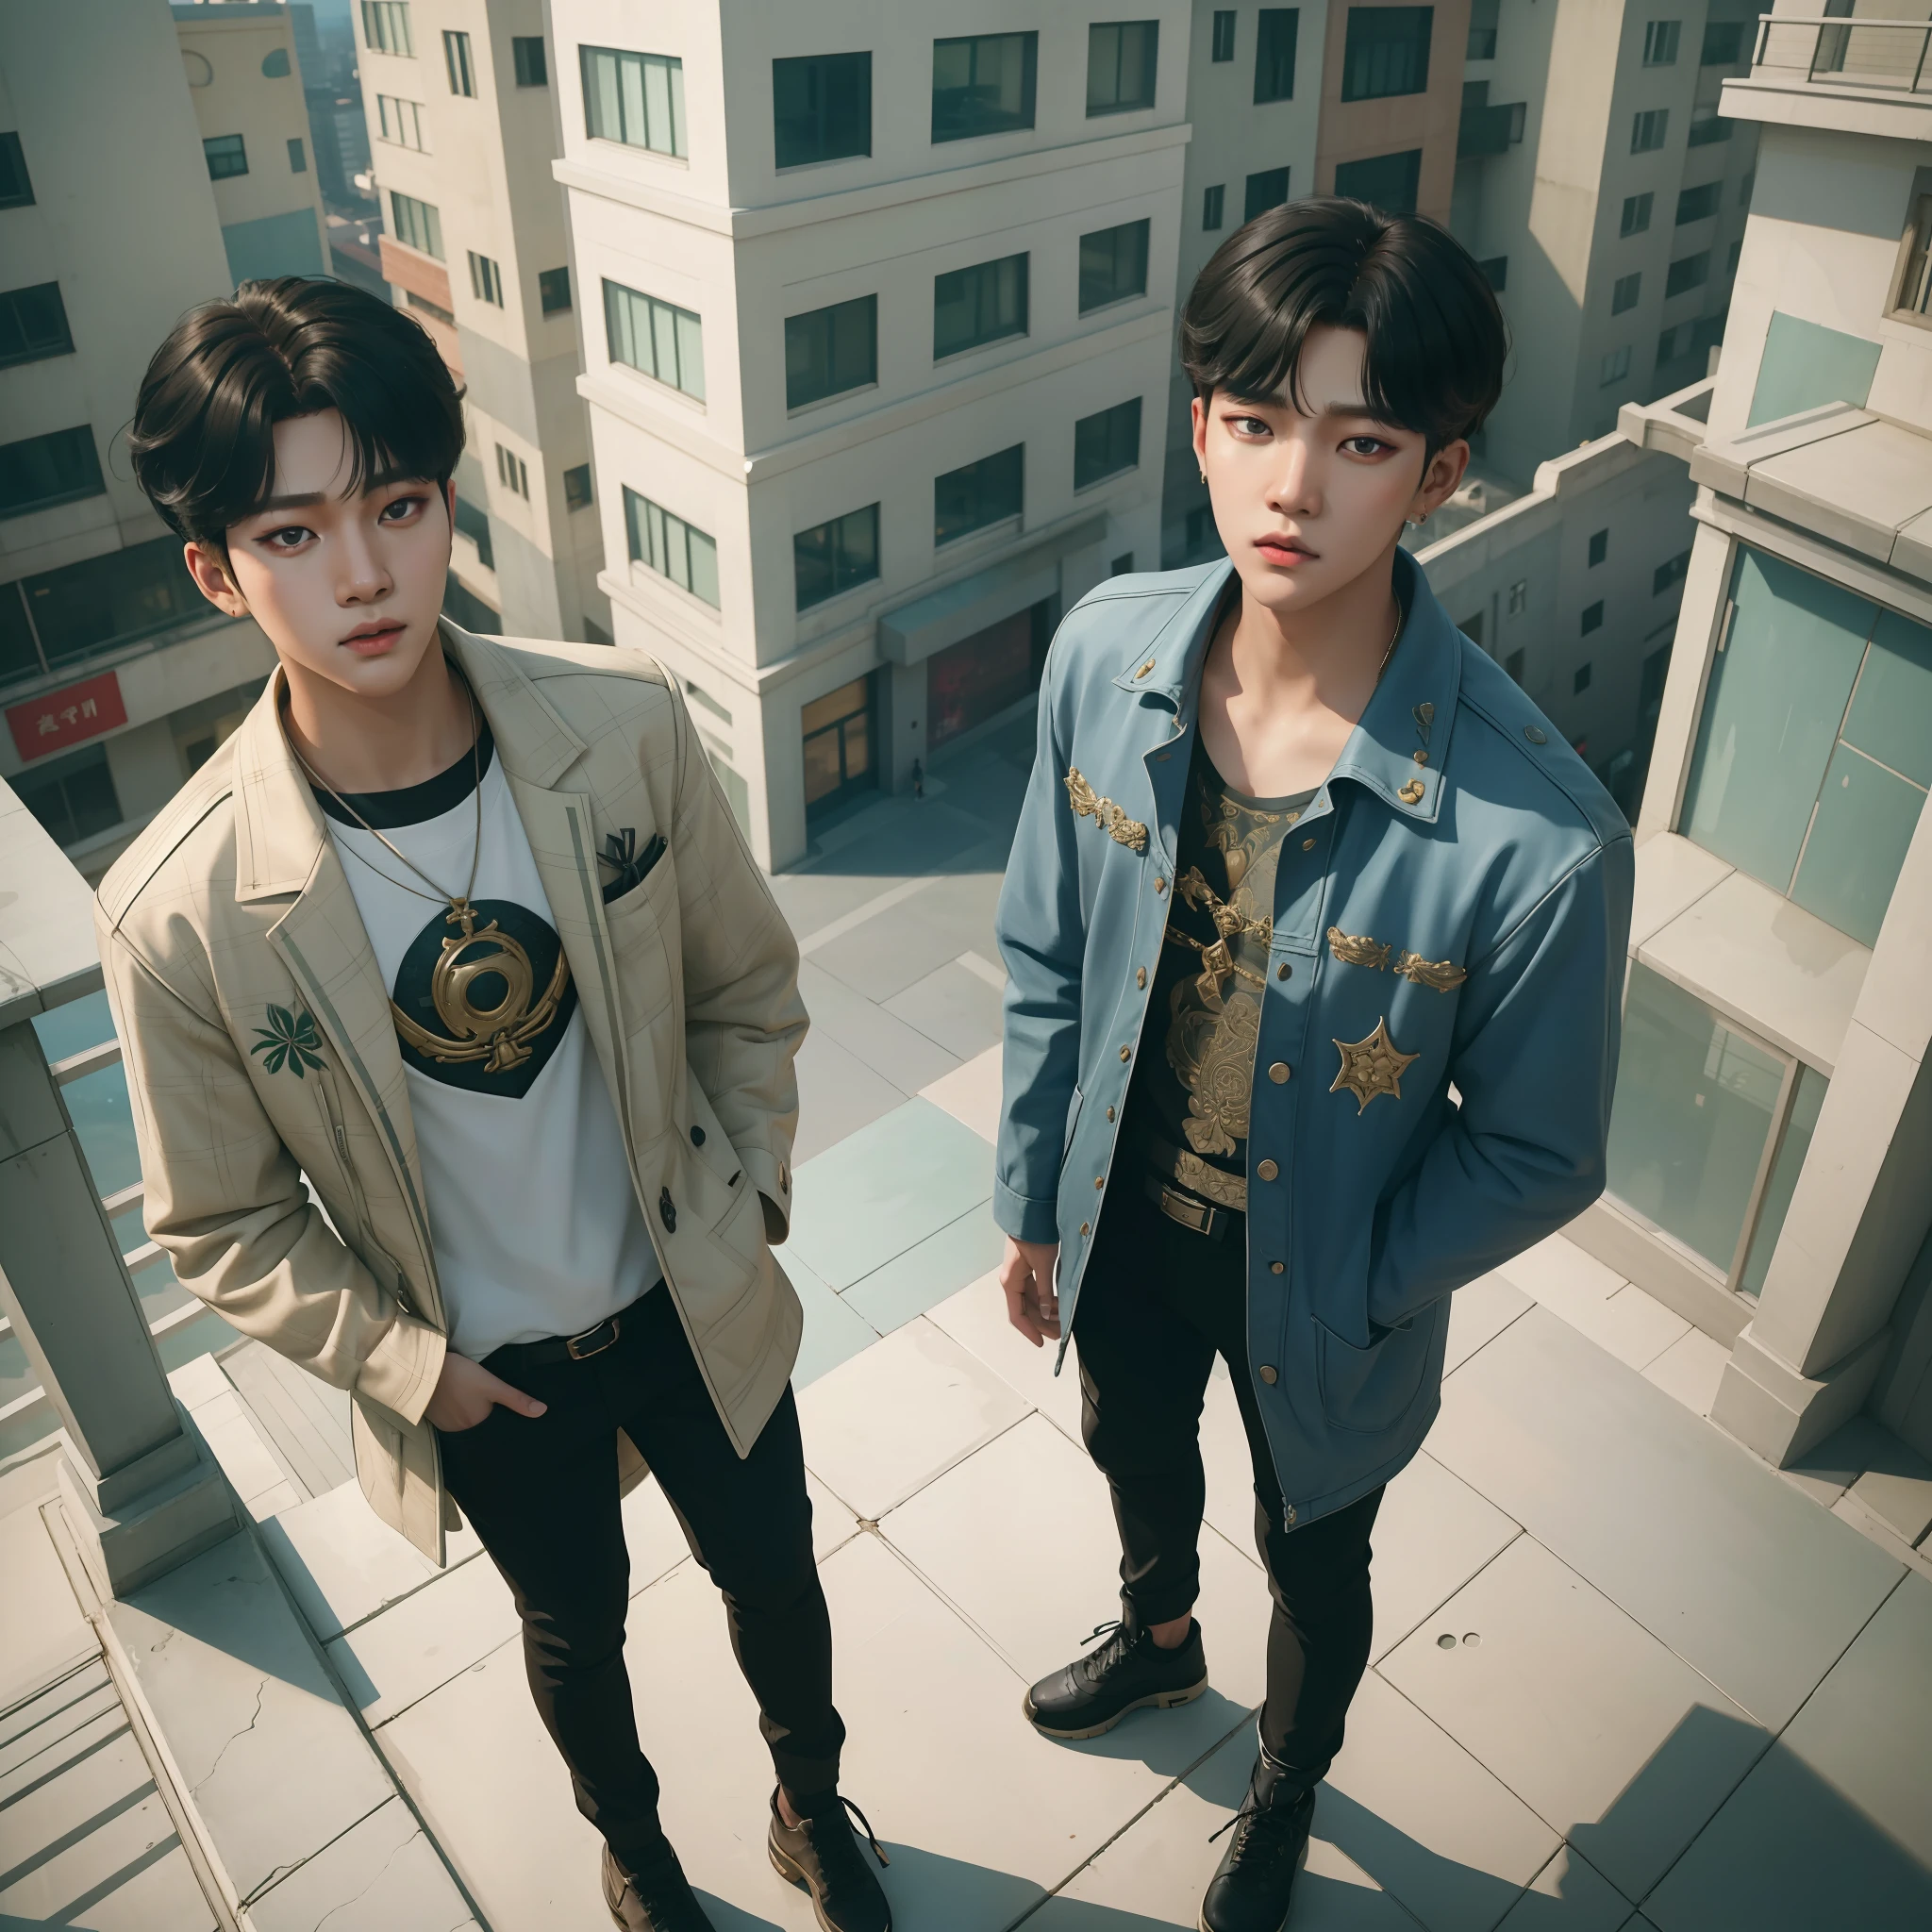 (Aerial view), dynamic angle, ultra-detailed, (standing), (full body), 1boy ((j-hope)) and 1boy ((taehyung)), a beautiful couple of Asian boys, short black hair, beautiful faces insipirado in idol, urban clothes, atmosphere, photorealistic, masterpiece, artwork, intricate details, 8k, nikon RAW photo, fujifilm XT3, best quality, high resolution